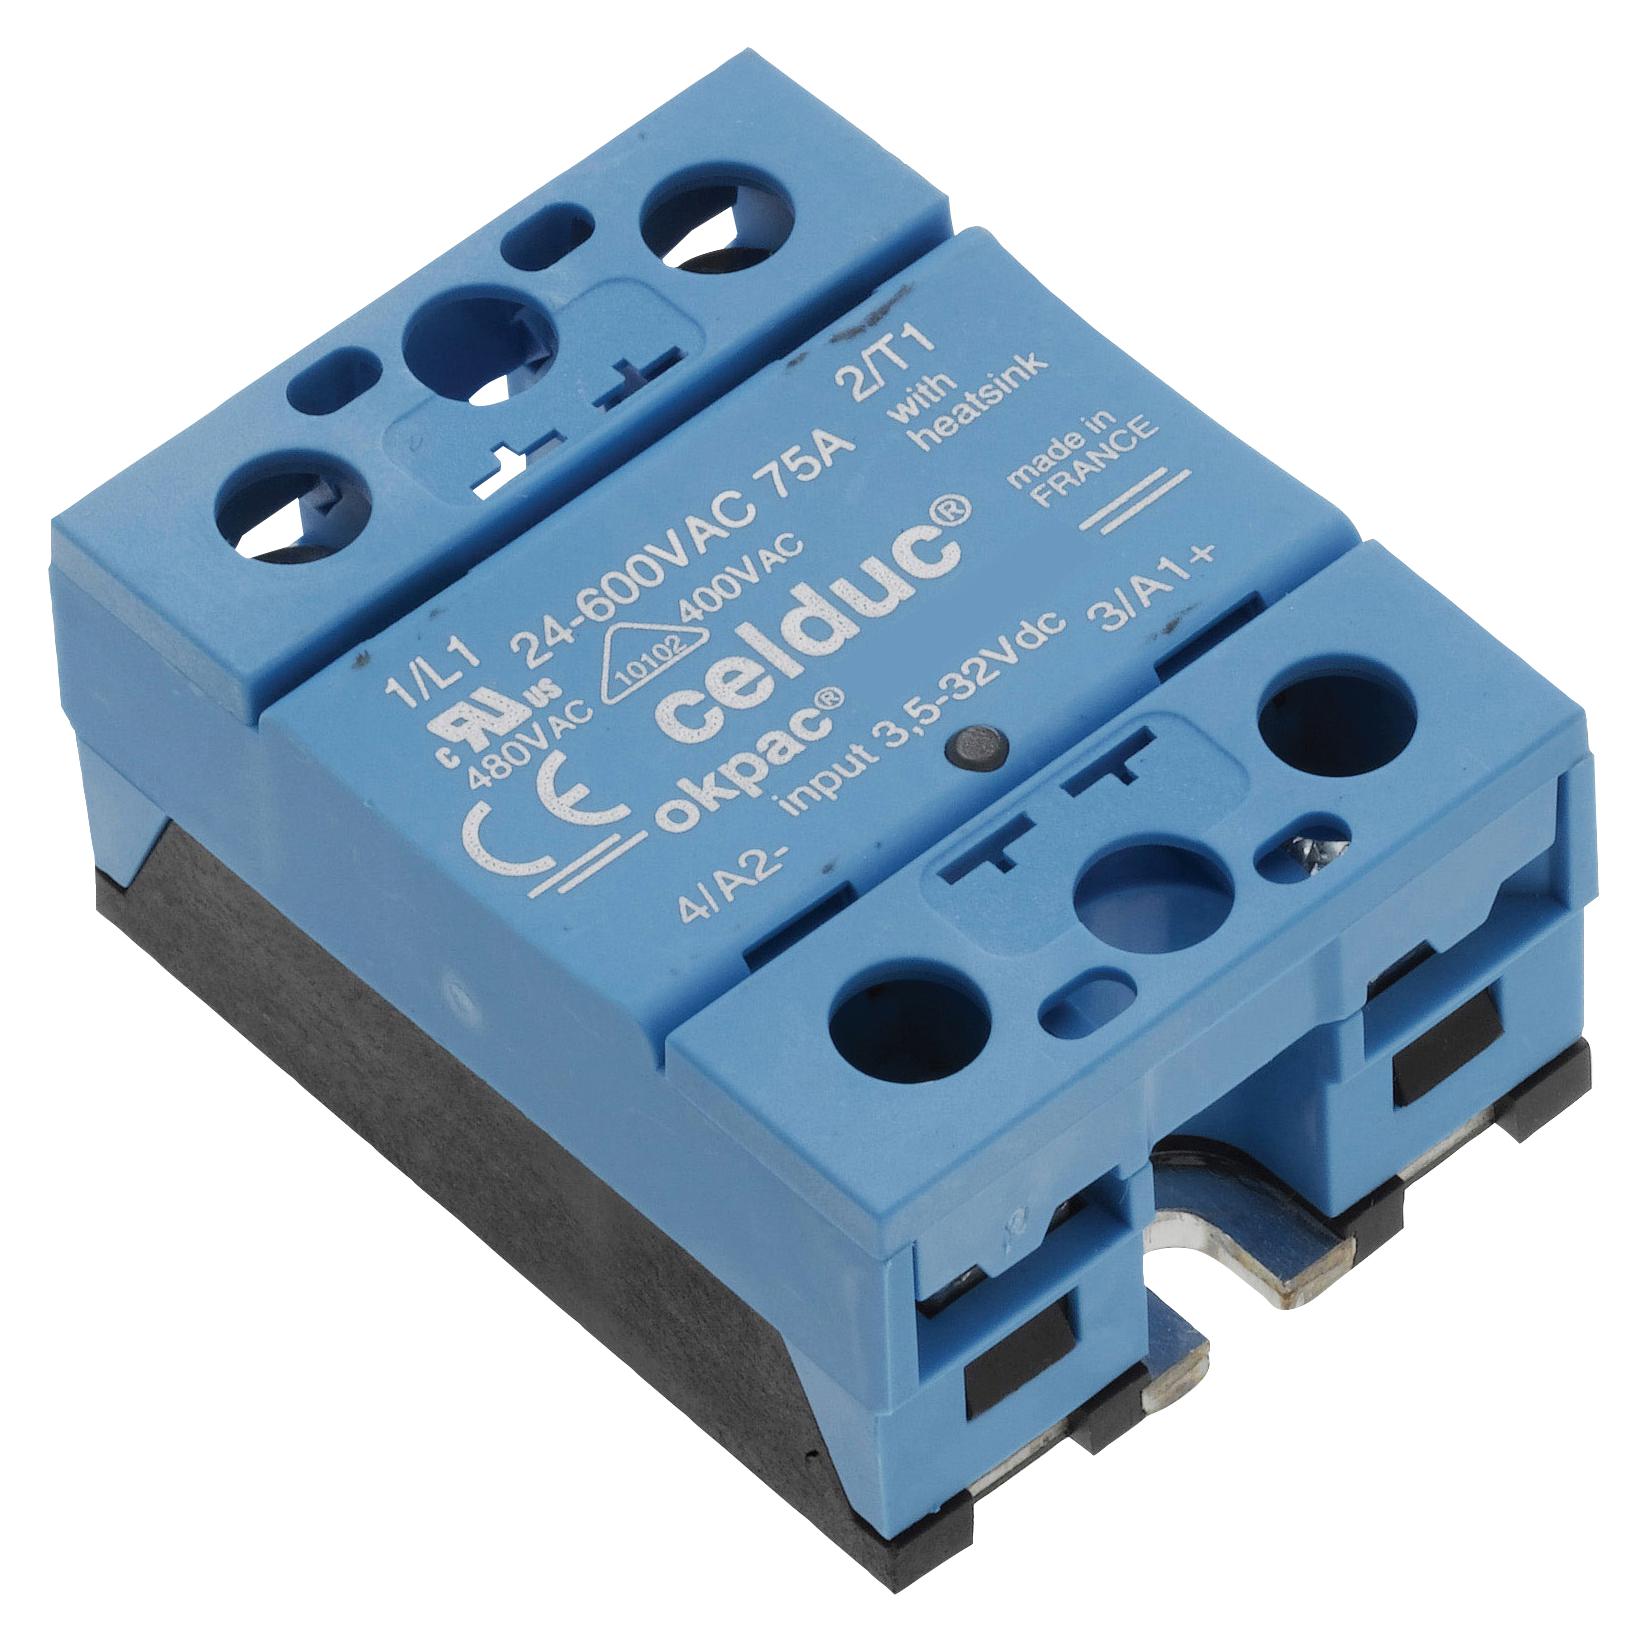 SO765090 SOLID STATE RELAY, 3.5-32V, PANEL CELDUC